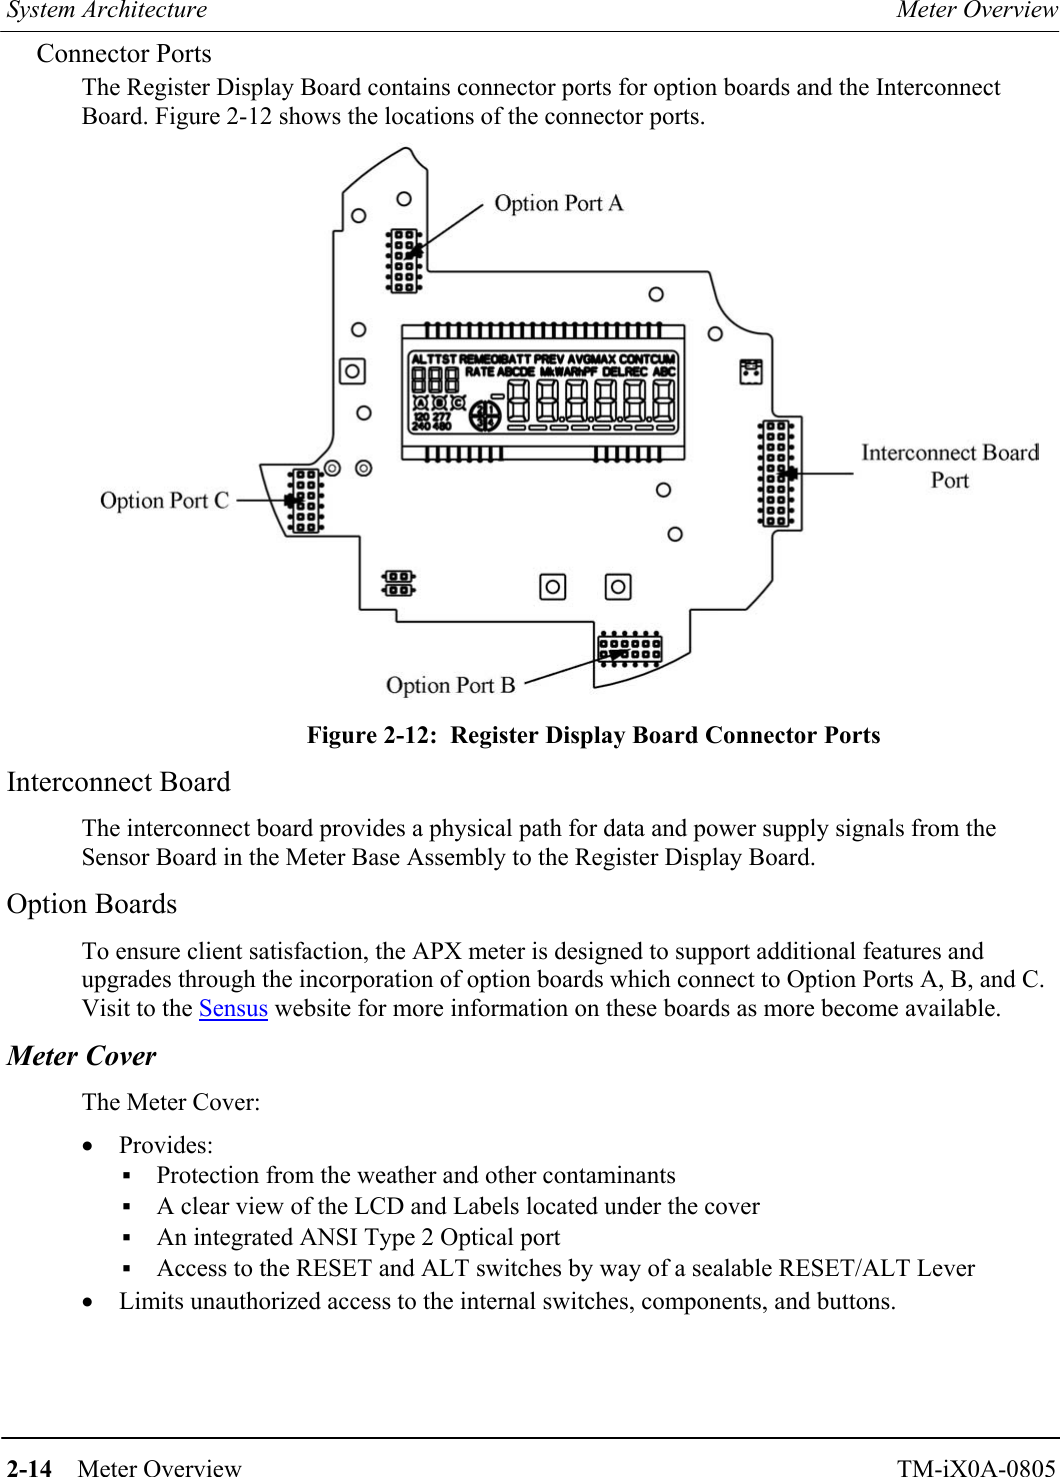 System Architecture  Meter Overview   2-14    Meter Overview TM-iX0A-0805 Connector Ports The Register Display Board contains connector ports for option boards and the Interconnect Board. Figure 2-12 shows the locations of the connector ports.   Figure 2-12:  Register Display Board Connector Ports Interconnect Board The interconnect board provides a physical path for data and power supply signals from the Sensor Board in the Meter Base Assembly to the Register Display Board. Option Boards To ensure client satisfaction, the APX meter is designed to support additional features and upgrades through the incorporation of option boards which connect to Option Ports A, B, and C. Visit to the Sensus website for more information on these boards as more become available.  Meter Cover The Meter Cover: •  Provides: ▪ Protection from the weather and other contaminants ▪ A clear view of the LCD and Labels located under the cover ▪ An integrated ANSI Type 2 Optical port ▪ Access to the RESET and ALT switches by way of a sealable RESET/ALT Lever •  Limits unauthorized access to the internal switches, components, and buttons.       